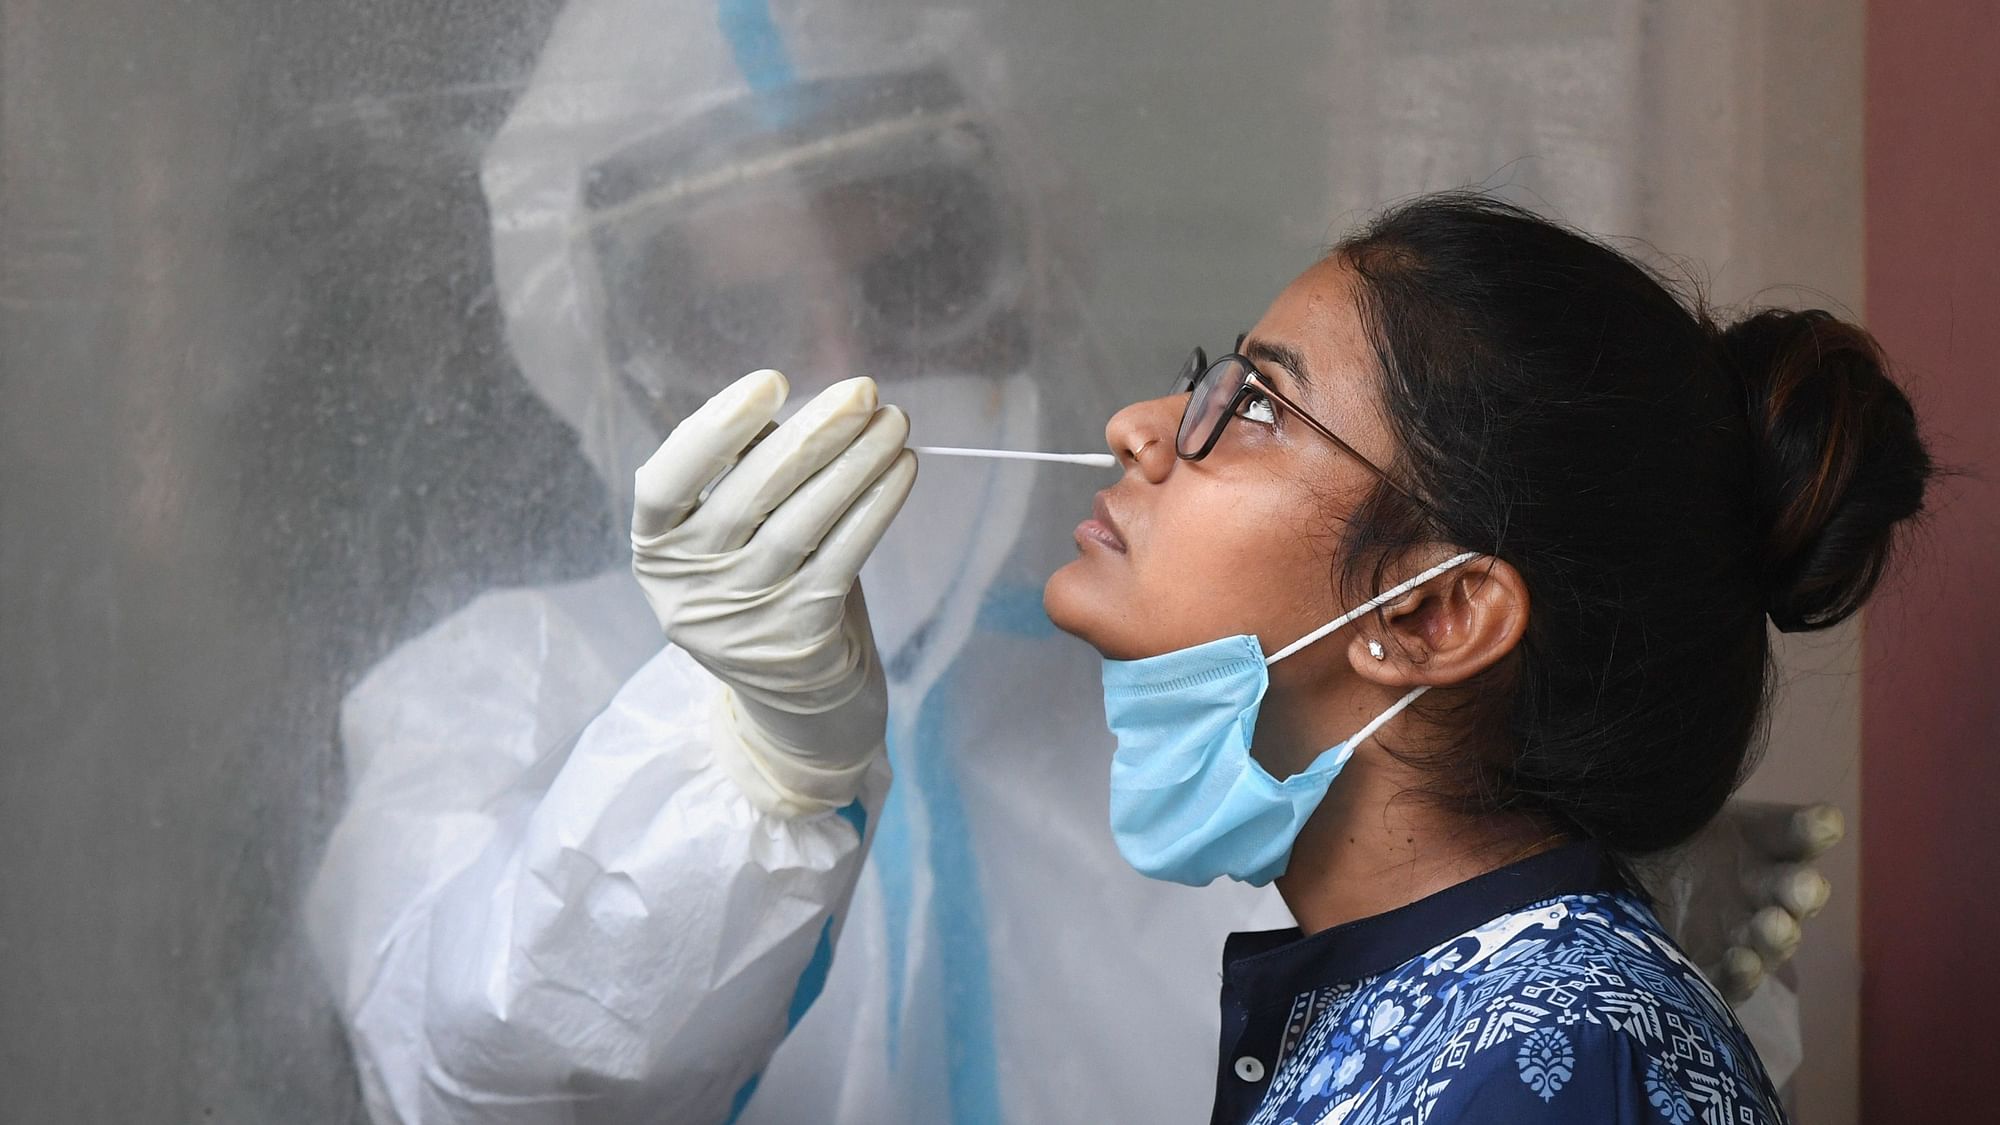 The price of a COVID-19 test in Delhi has been capped at Rs 2,400, the Home Ministry tweeted on Wednesday.